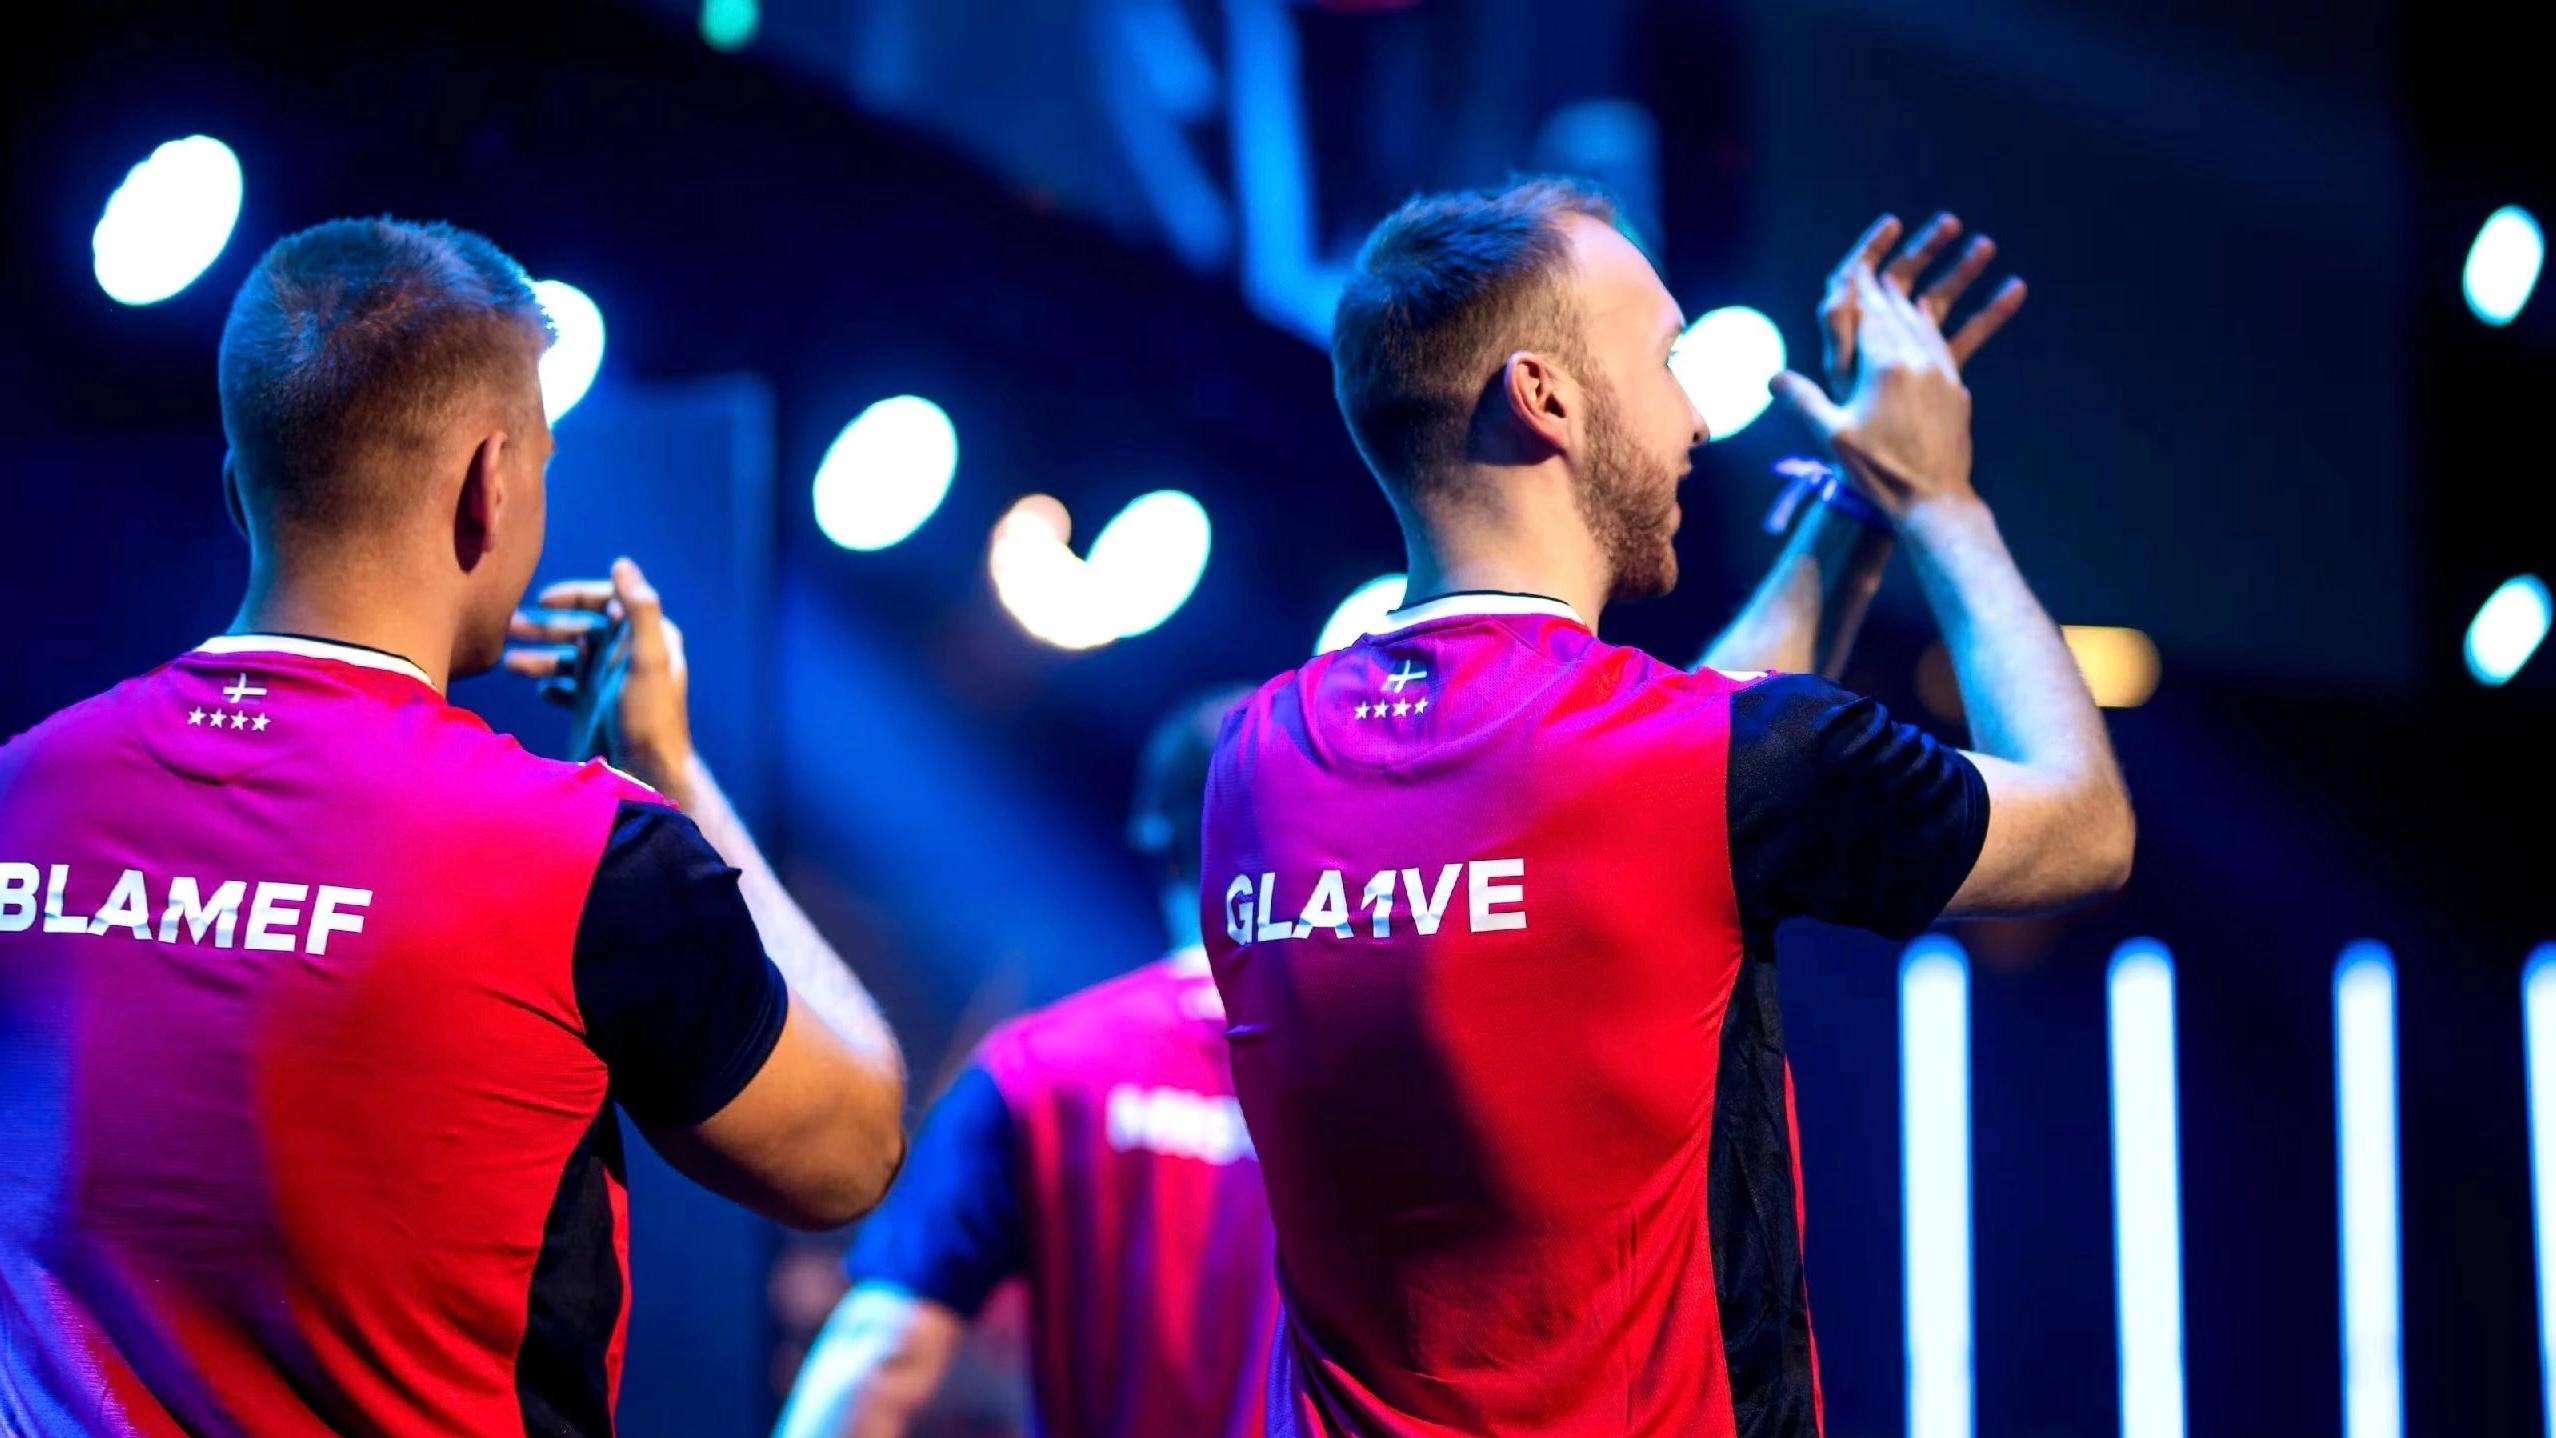 Astralis is trying to cope with financial problems